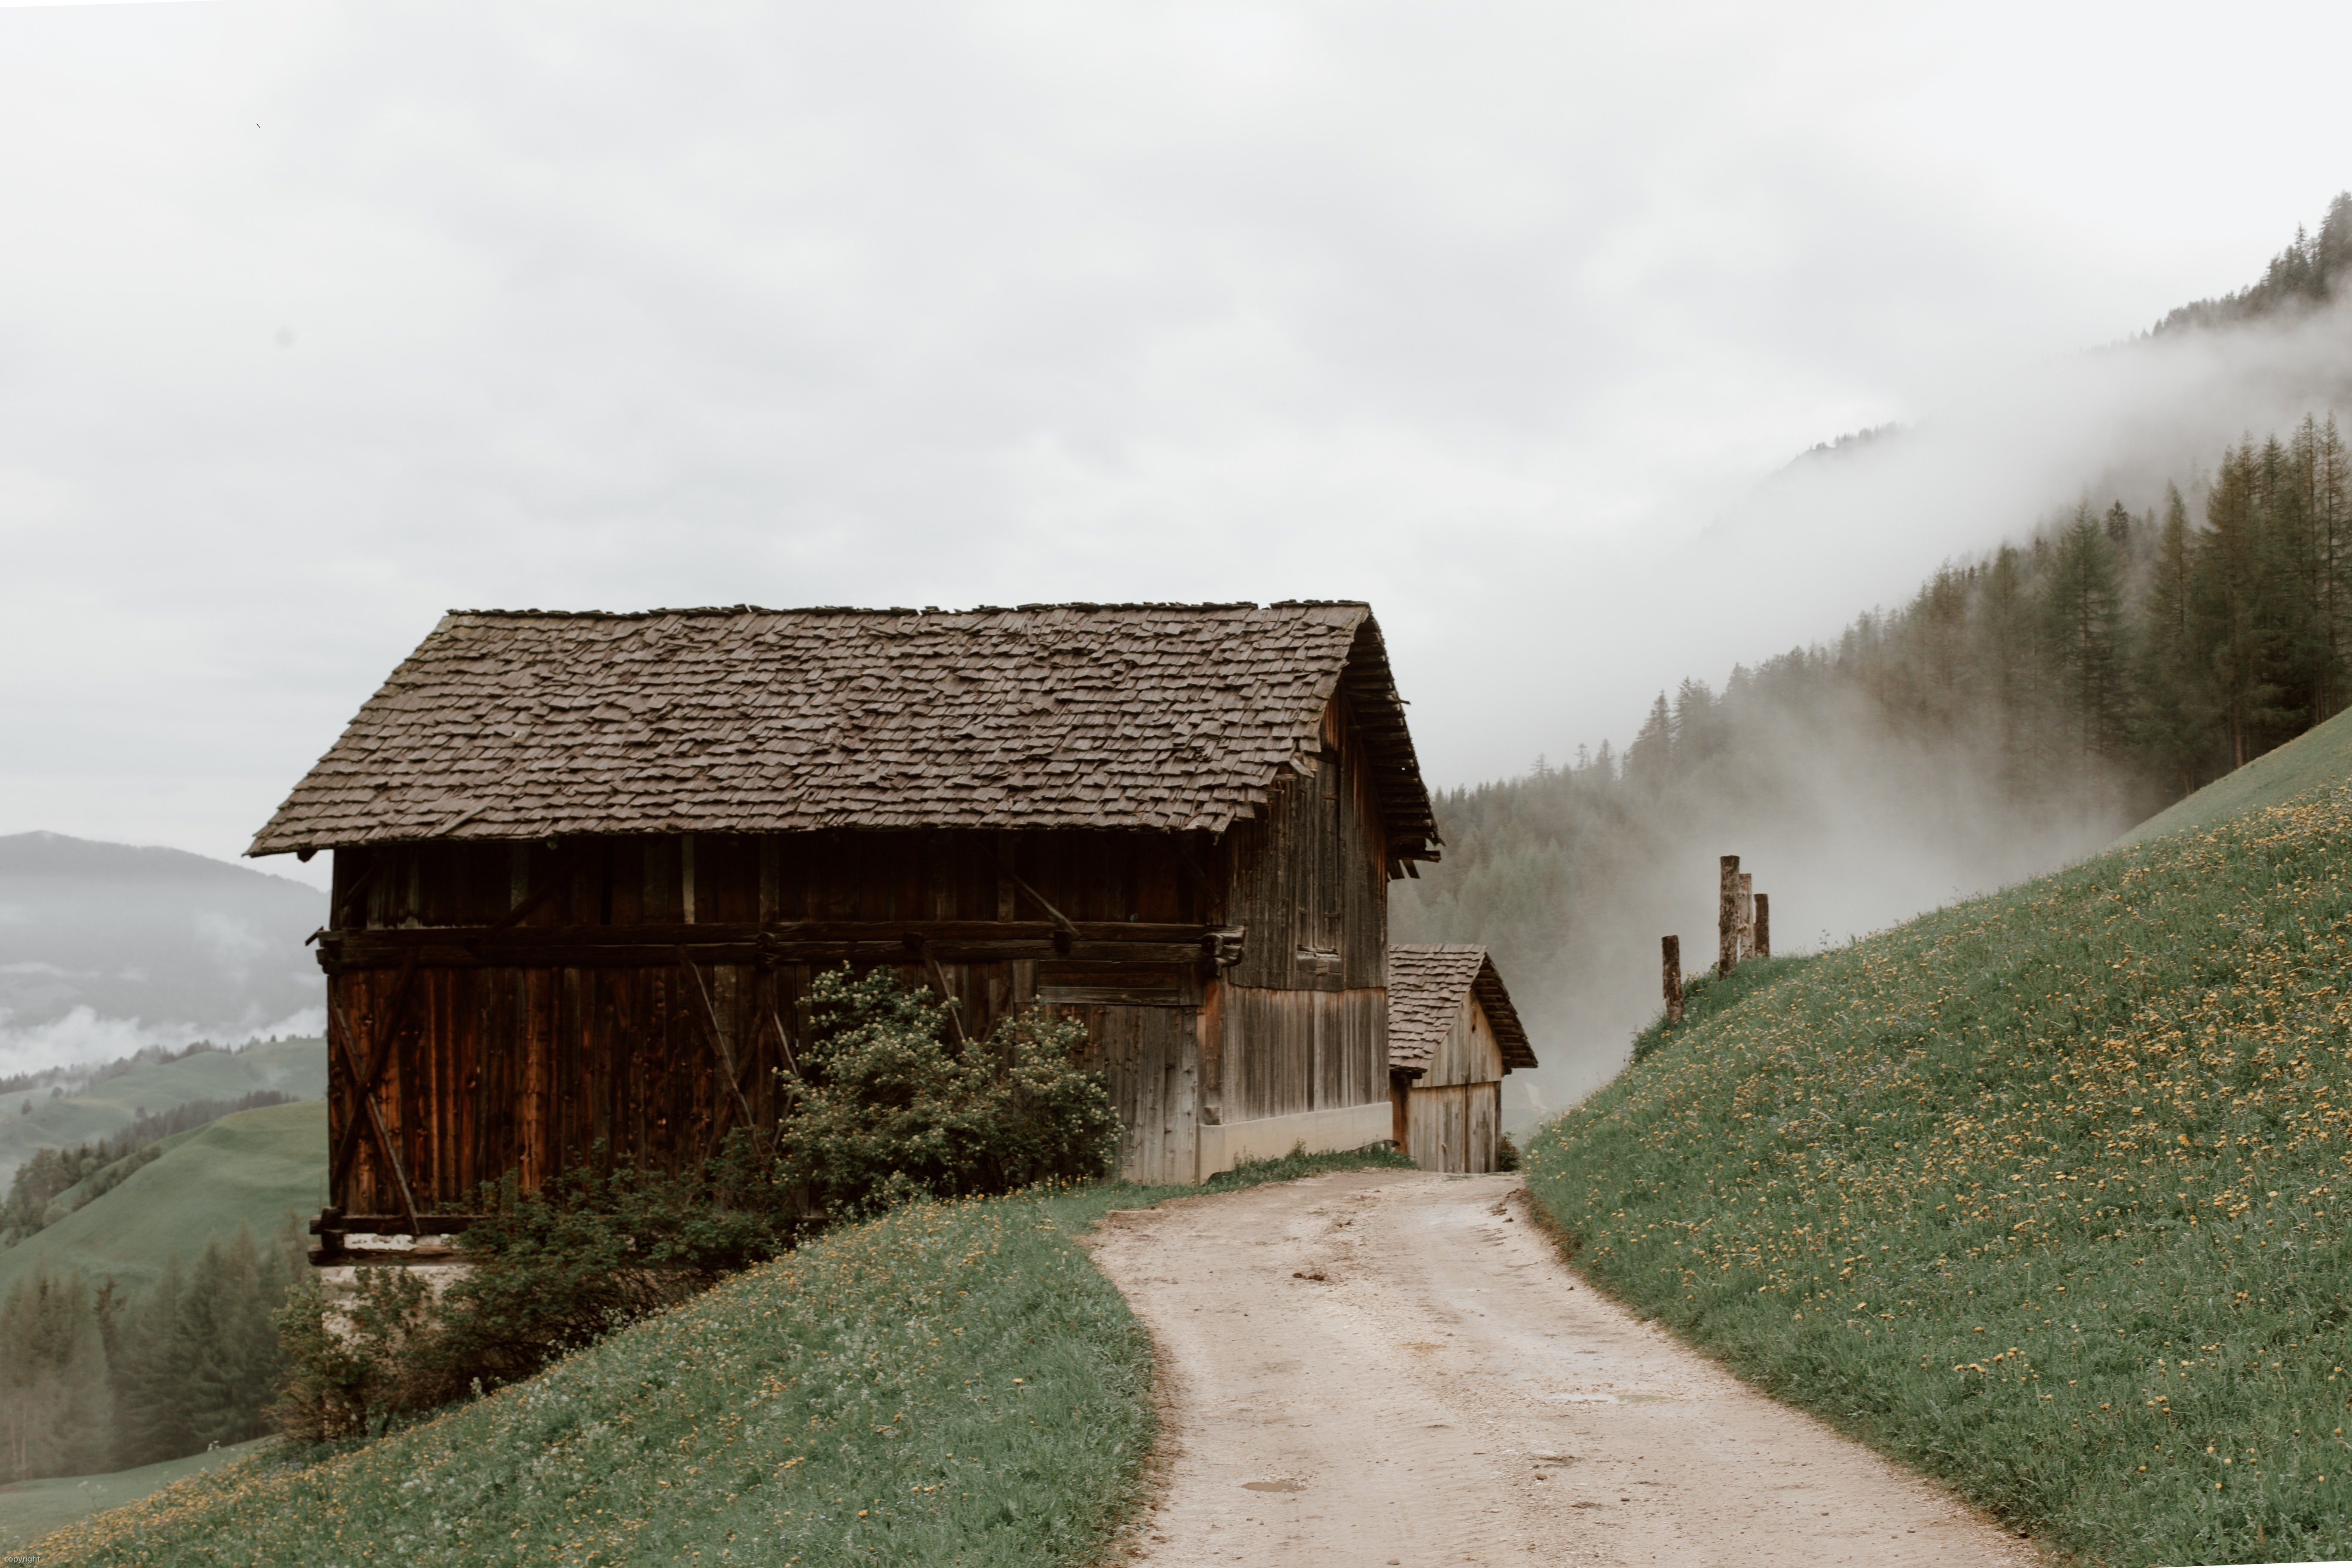 Pictured - A photo of rural houses on a slope | Source: Pexels 